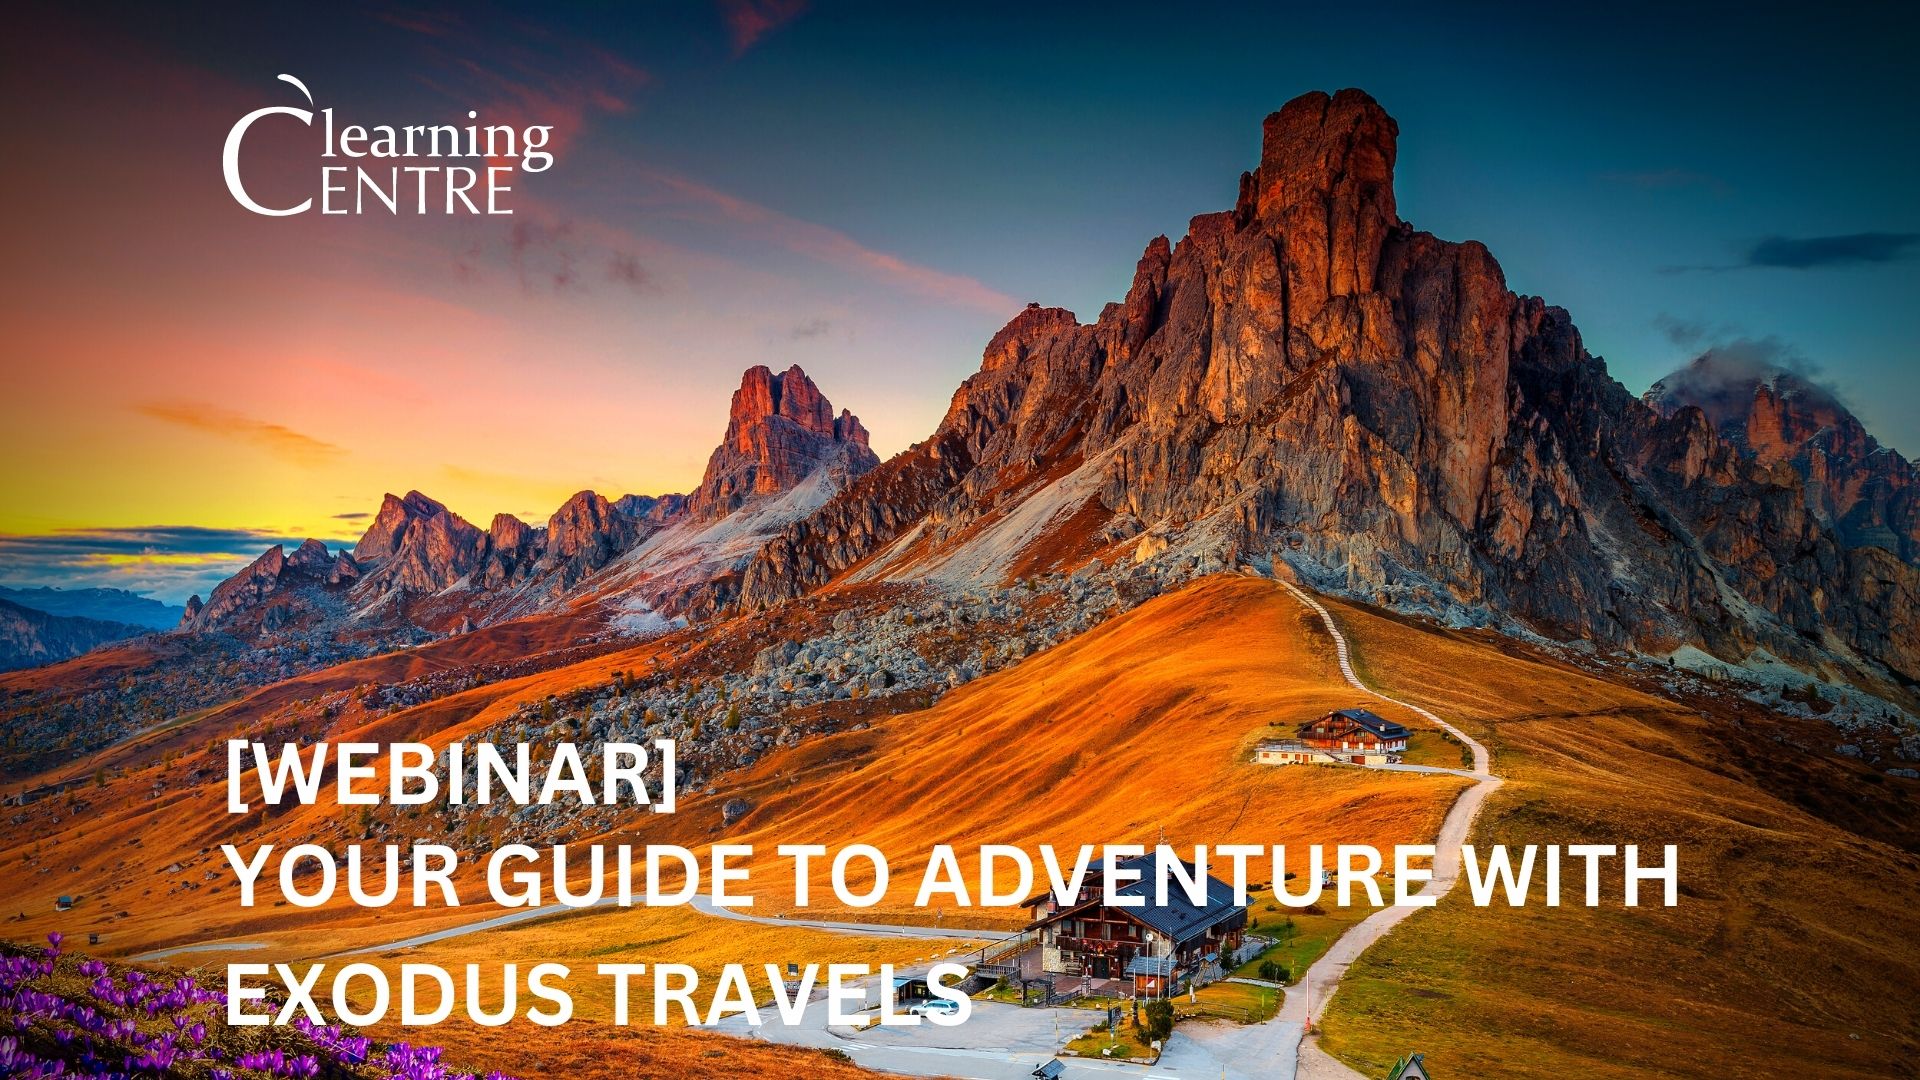 Your Guide to Adventure with Exodus Travels The Travelweek Learning